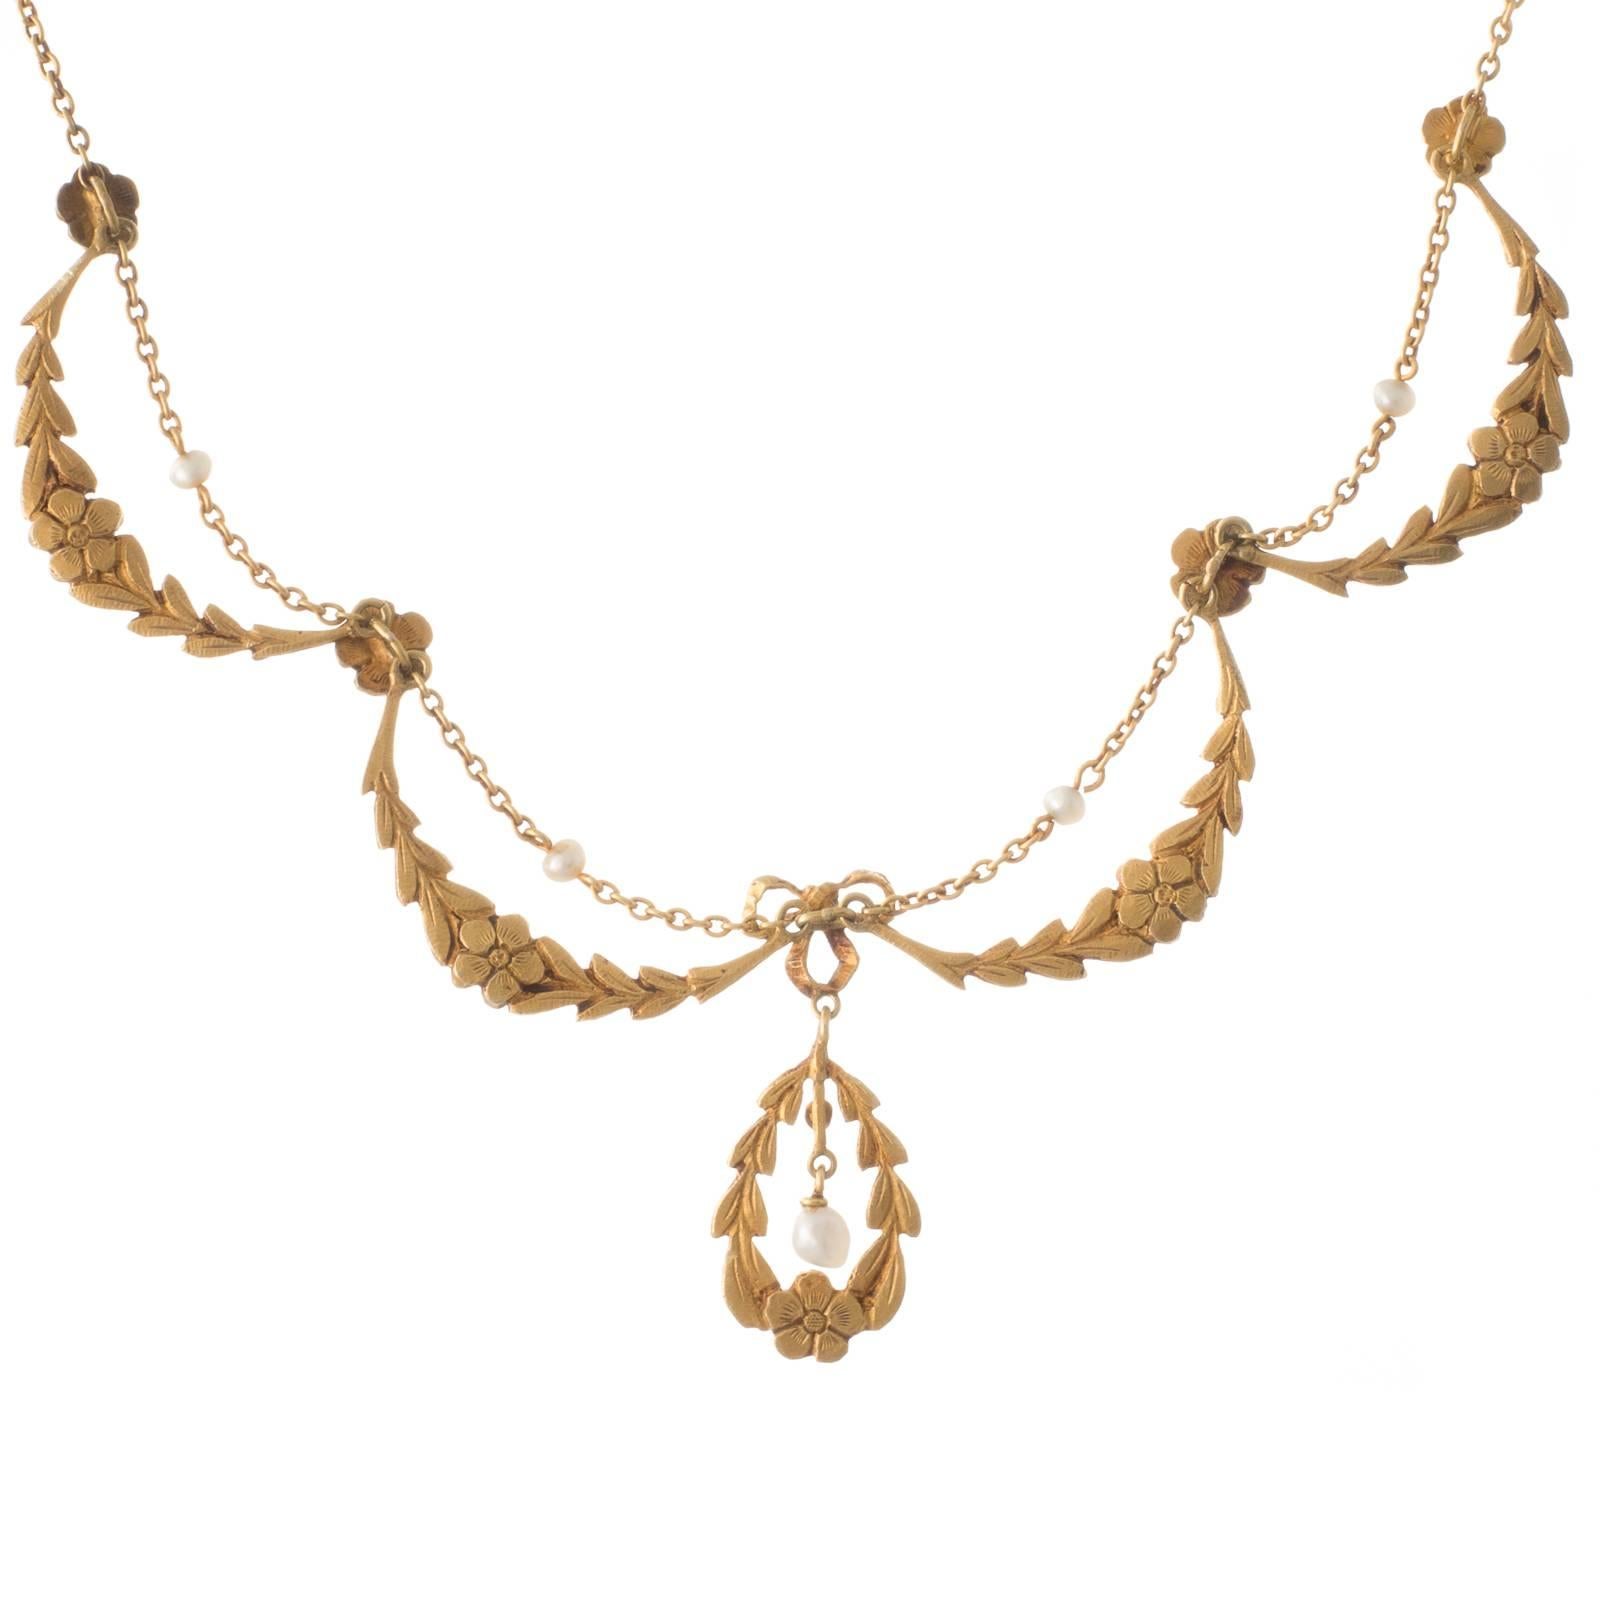 A fine 18ct yellow gold French antique necklet with four garland style swags meeting in the centre with a bow, from which is suspended a floral wreath with a seed pearl to its centre; the garlands are separated by individual flowers and above each a